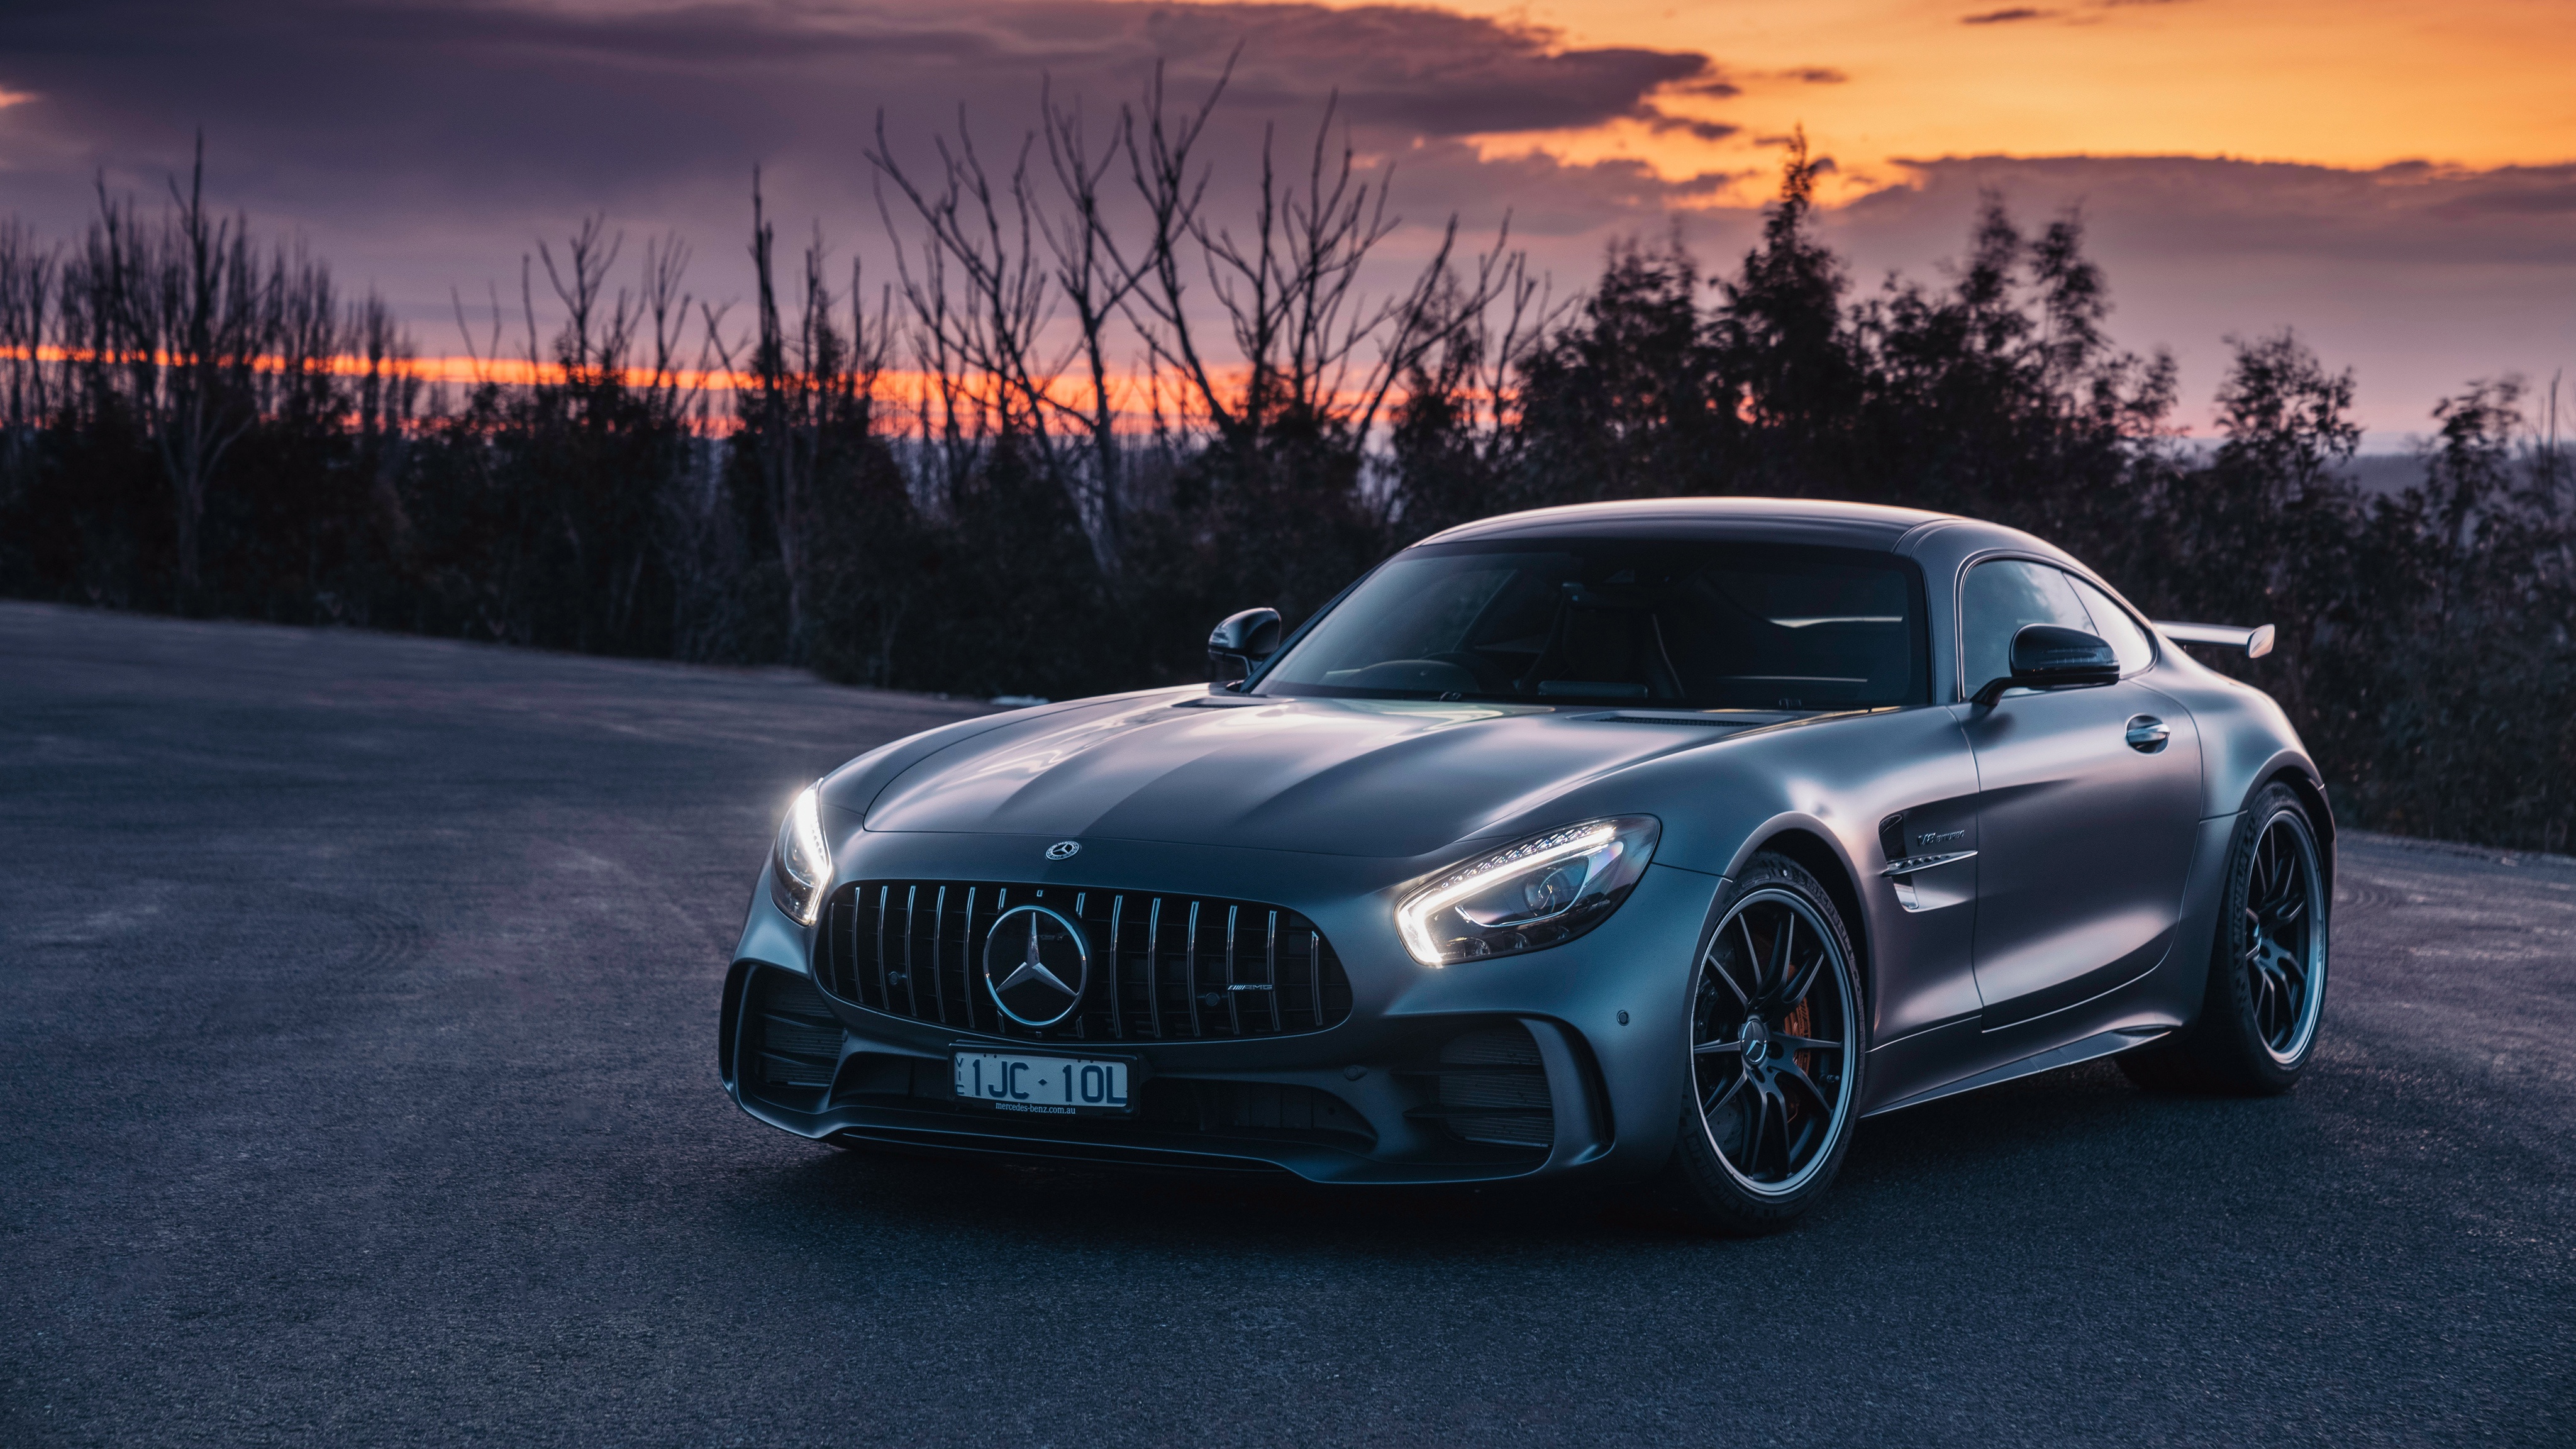 Mercedes Amg Gt Tablet Wallpapers